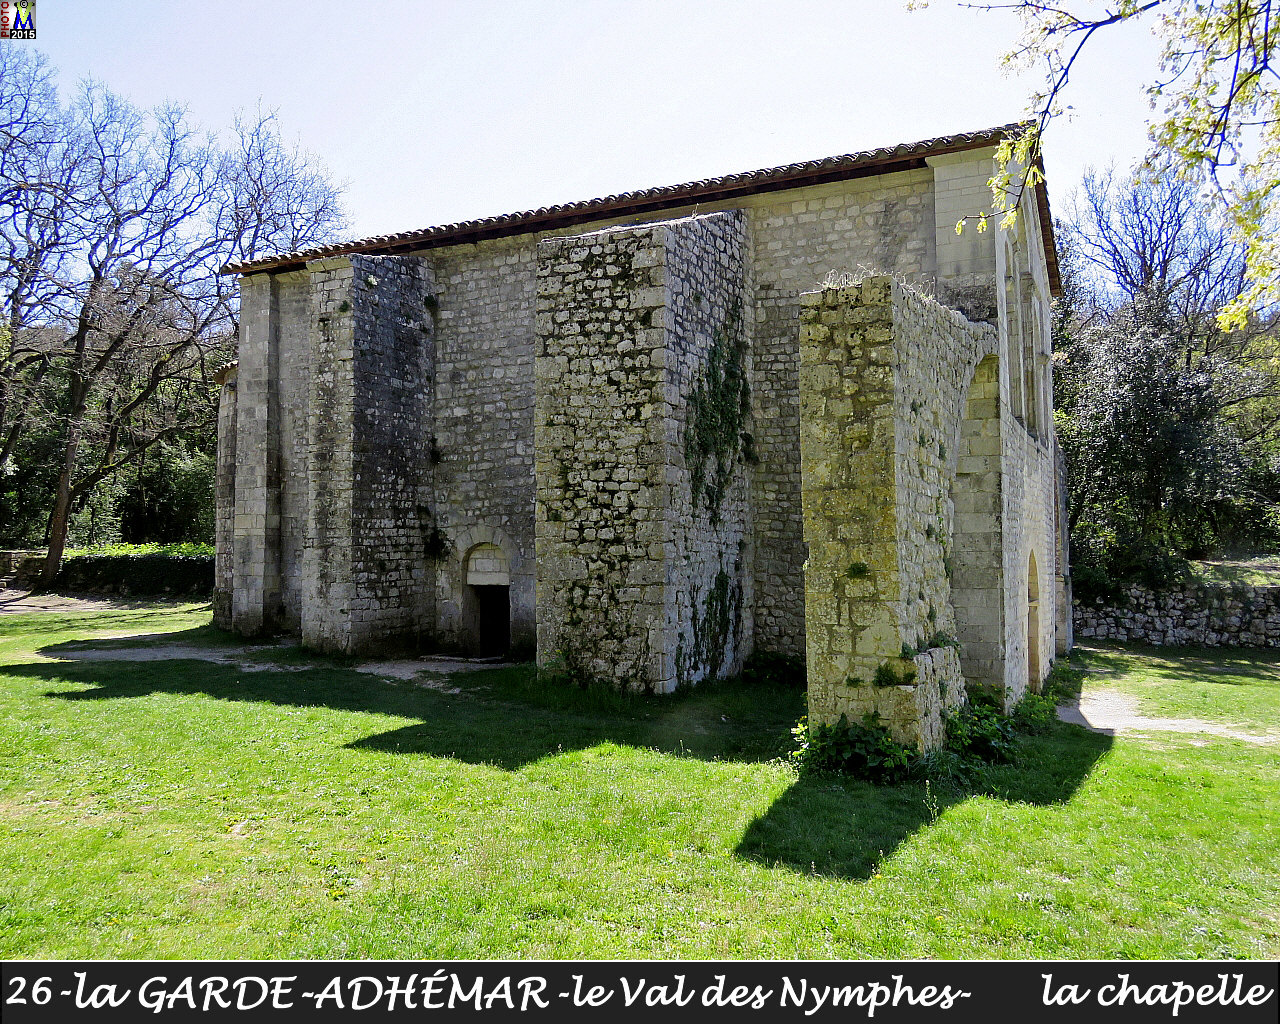 26GARDE-ADHEMARzVAL-NYMPHES_chapelle_106.jpg